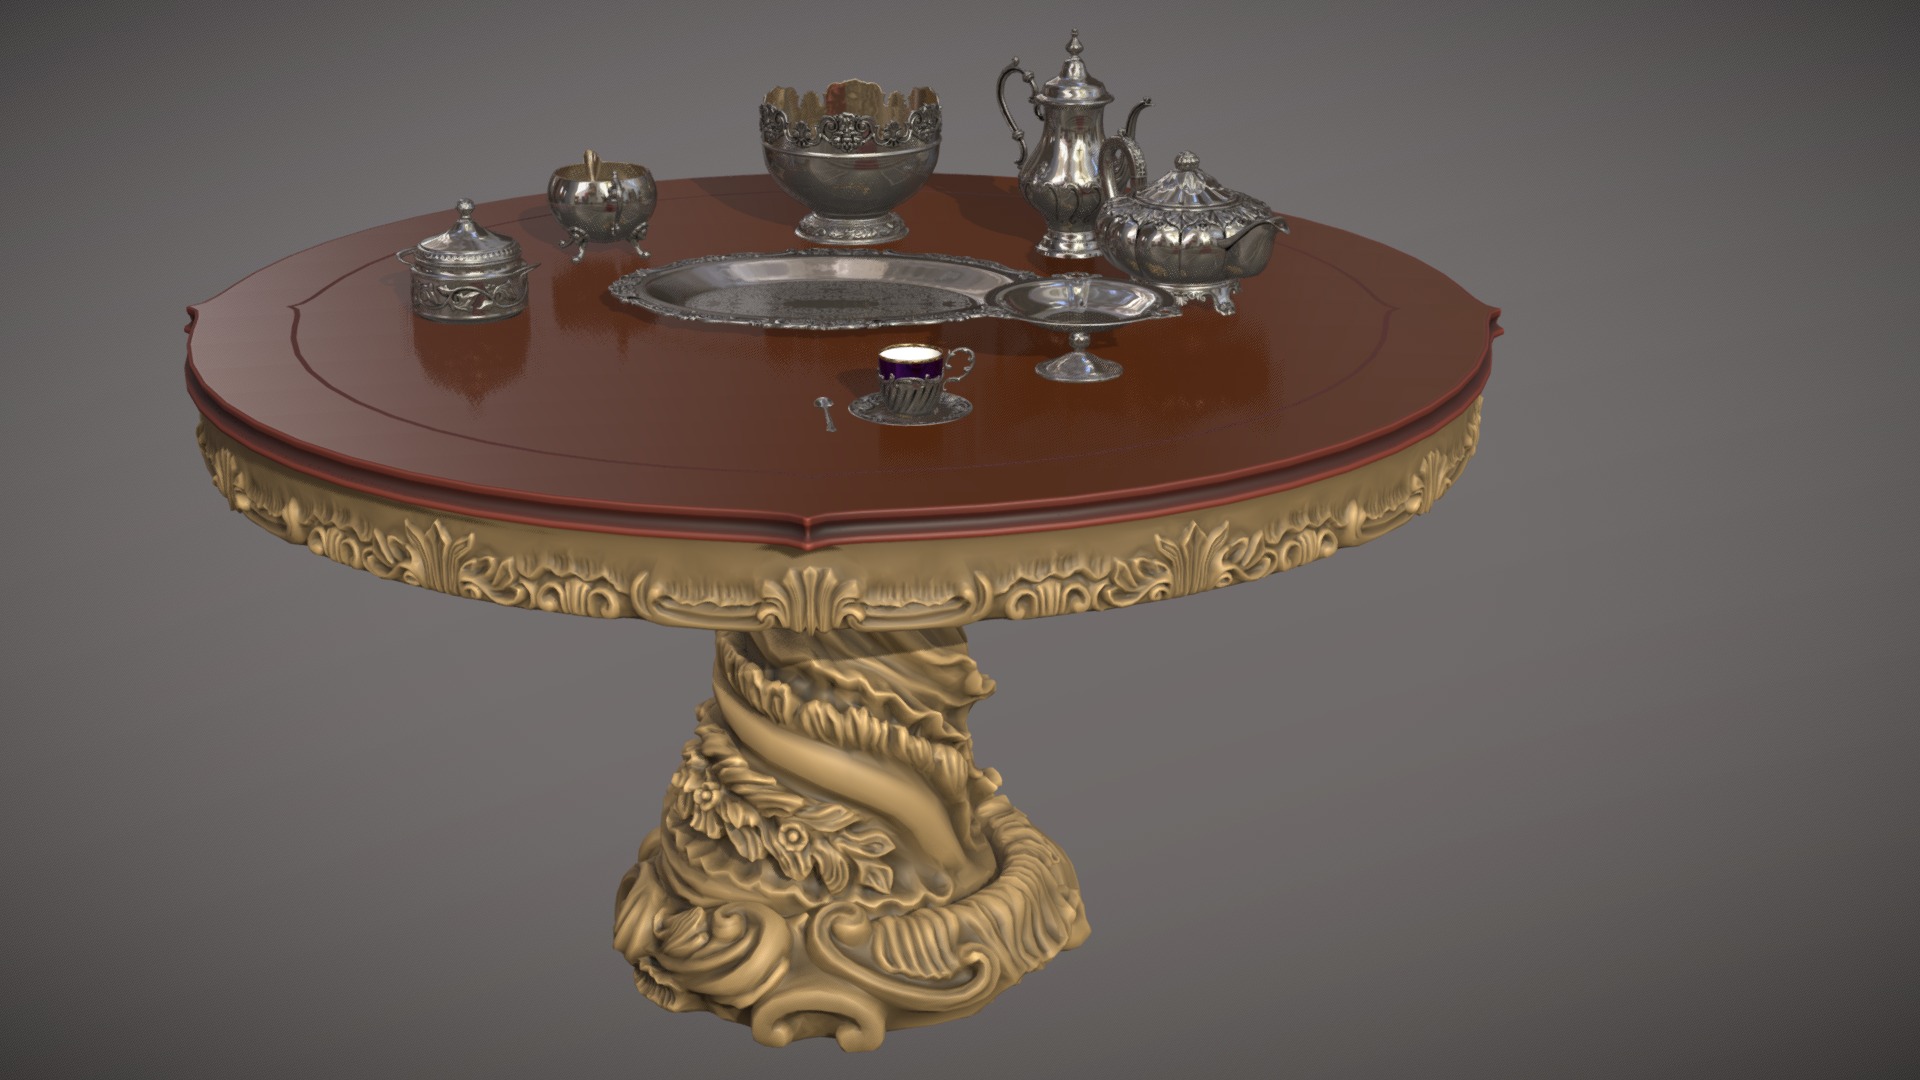 3D model Silver service set (9 effectivepoly items) - This is a 3D model of the Silver service set (9 effectivepoly items). The 3D model is about a table with a gold tray and silverware on it.